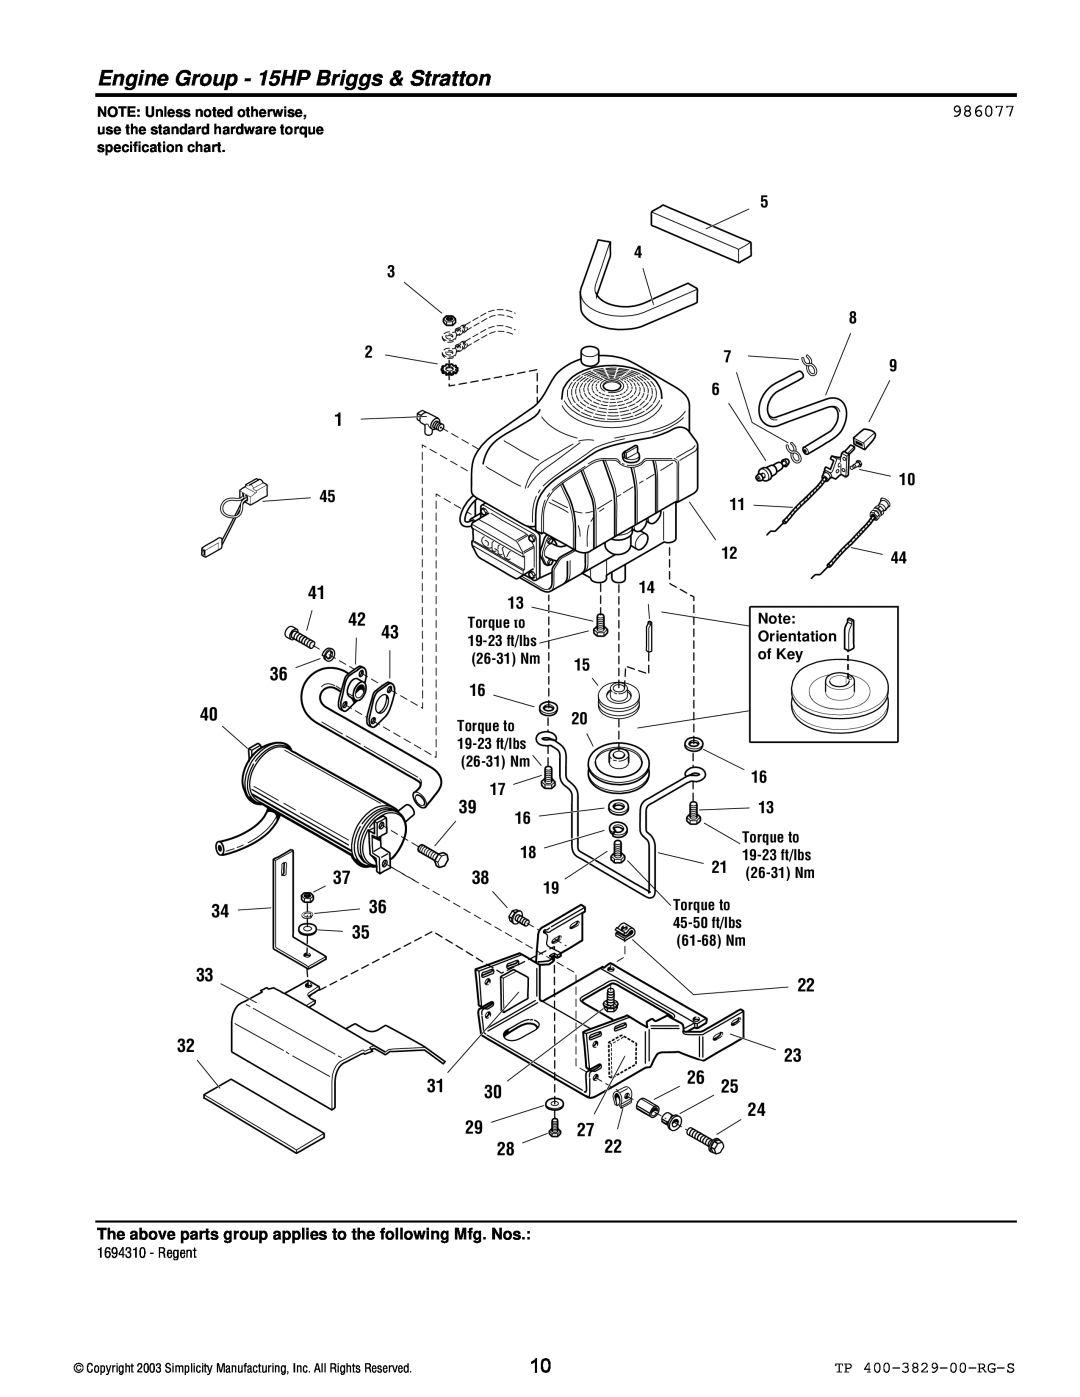 Simplicity 1693920 986077, Engine Group - 15HP Briggs & Stratton, TP 400-3829-00-RG-S, NOTE Unless noted otherwise, of Key 